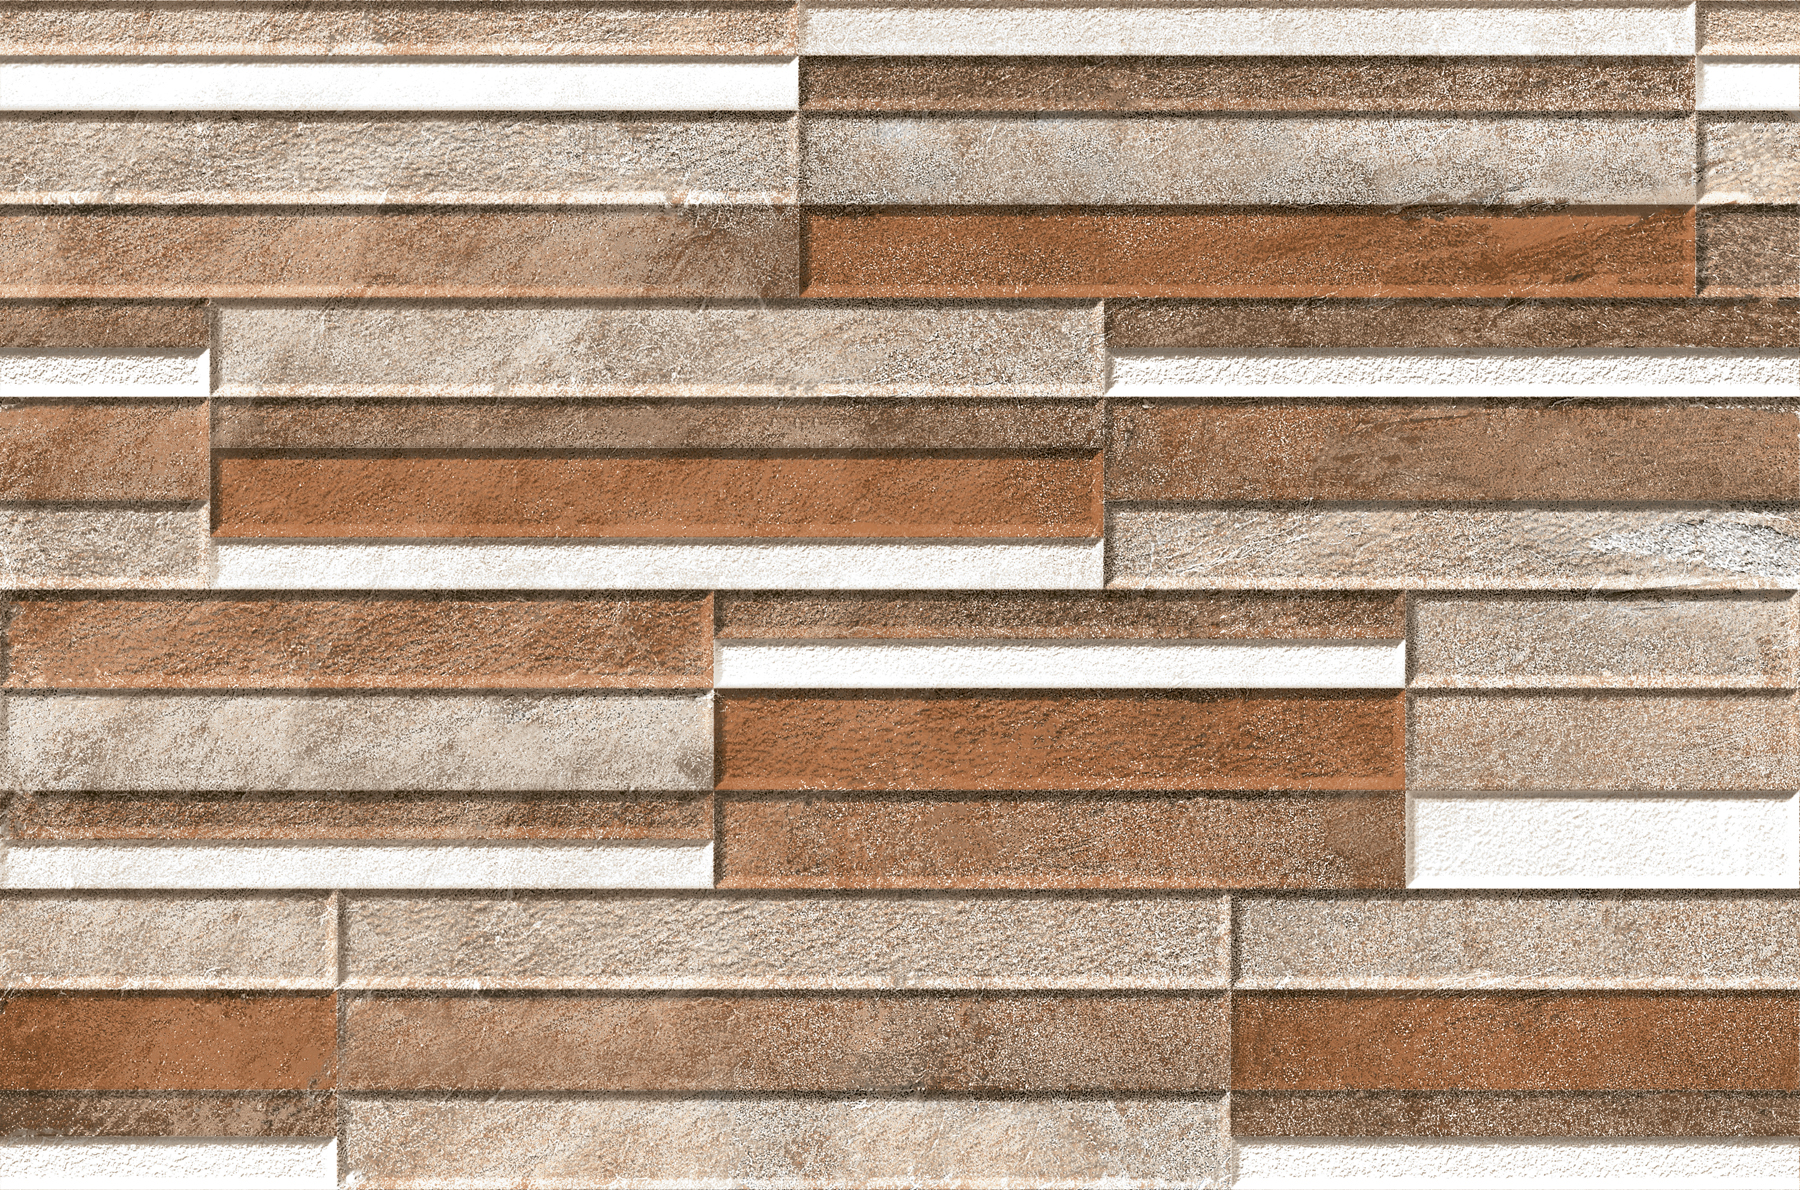 HD-P Elevation Tiles Collection for Elevation Tiles, Accent Tiles, Outdoor Tiles, Bar/Restaurant